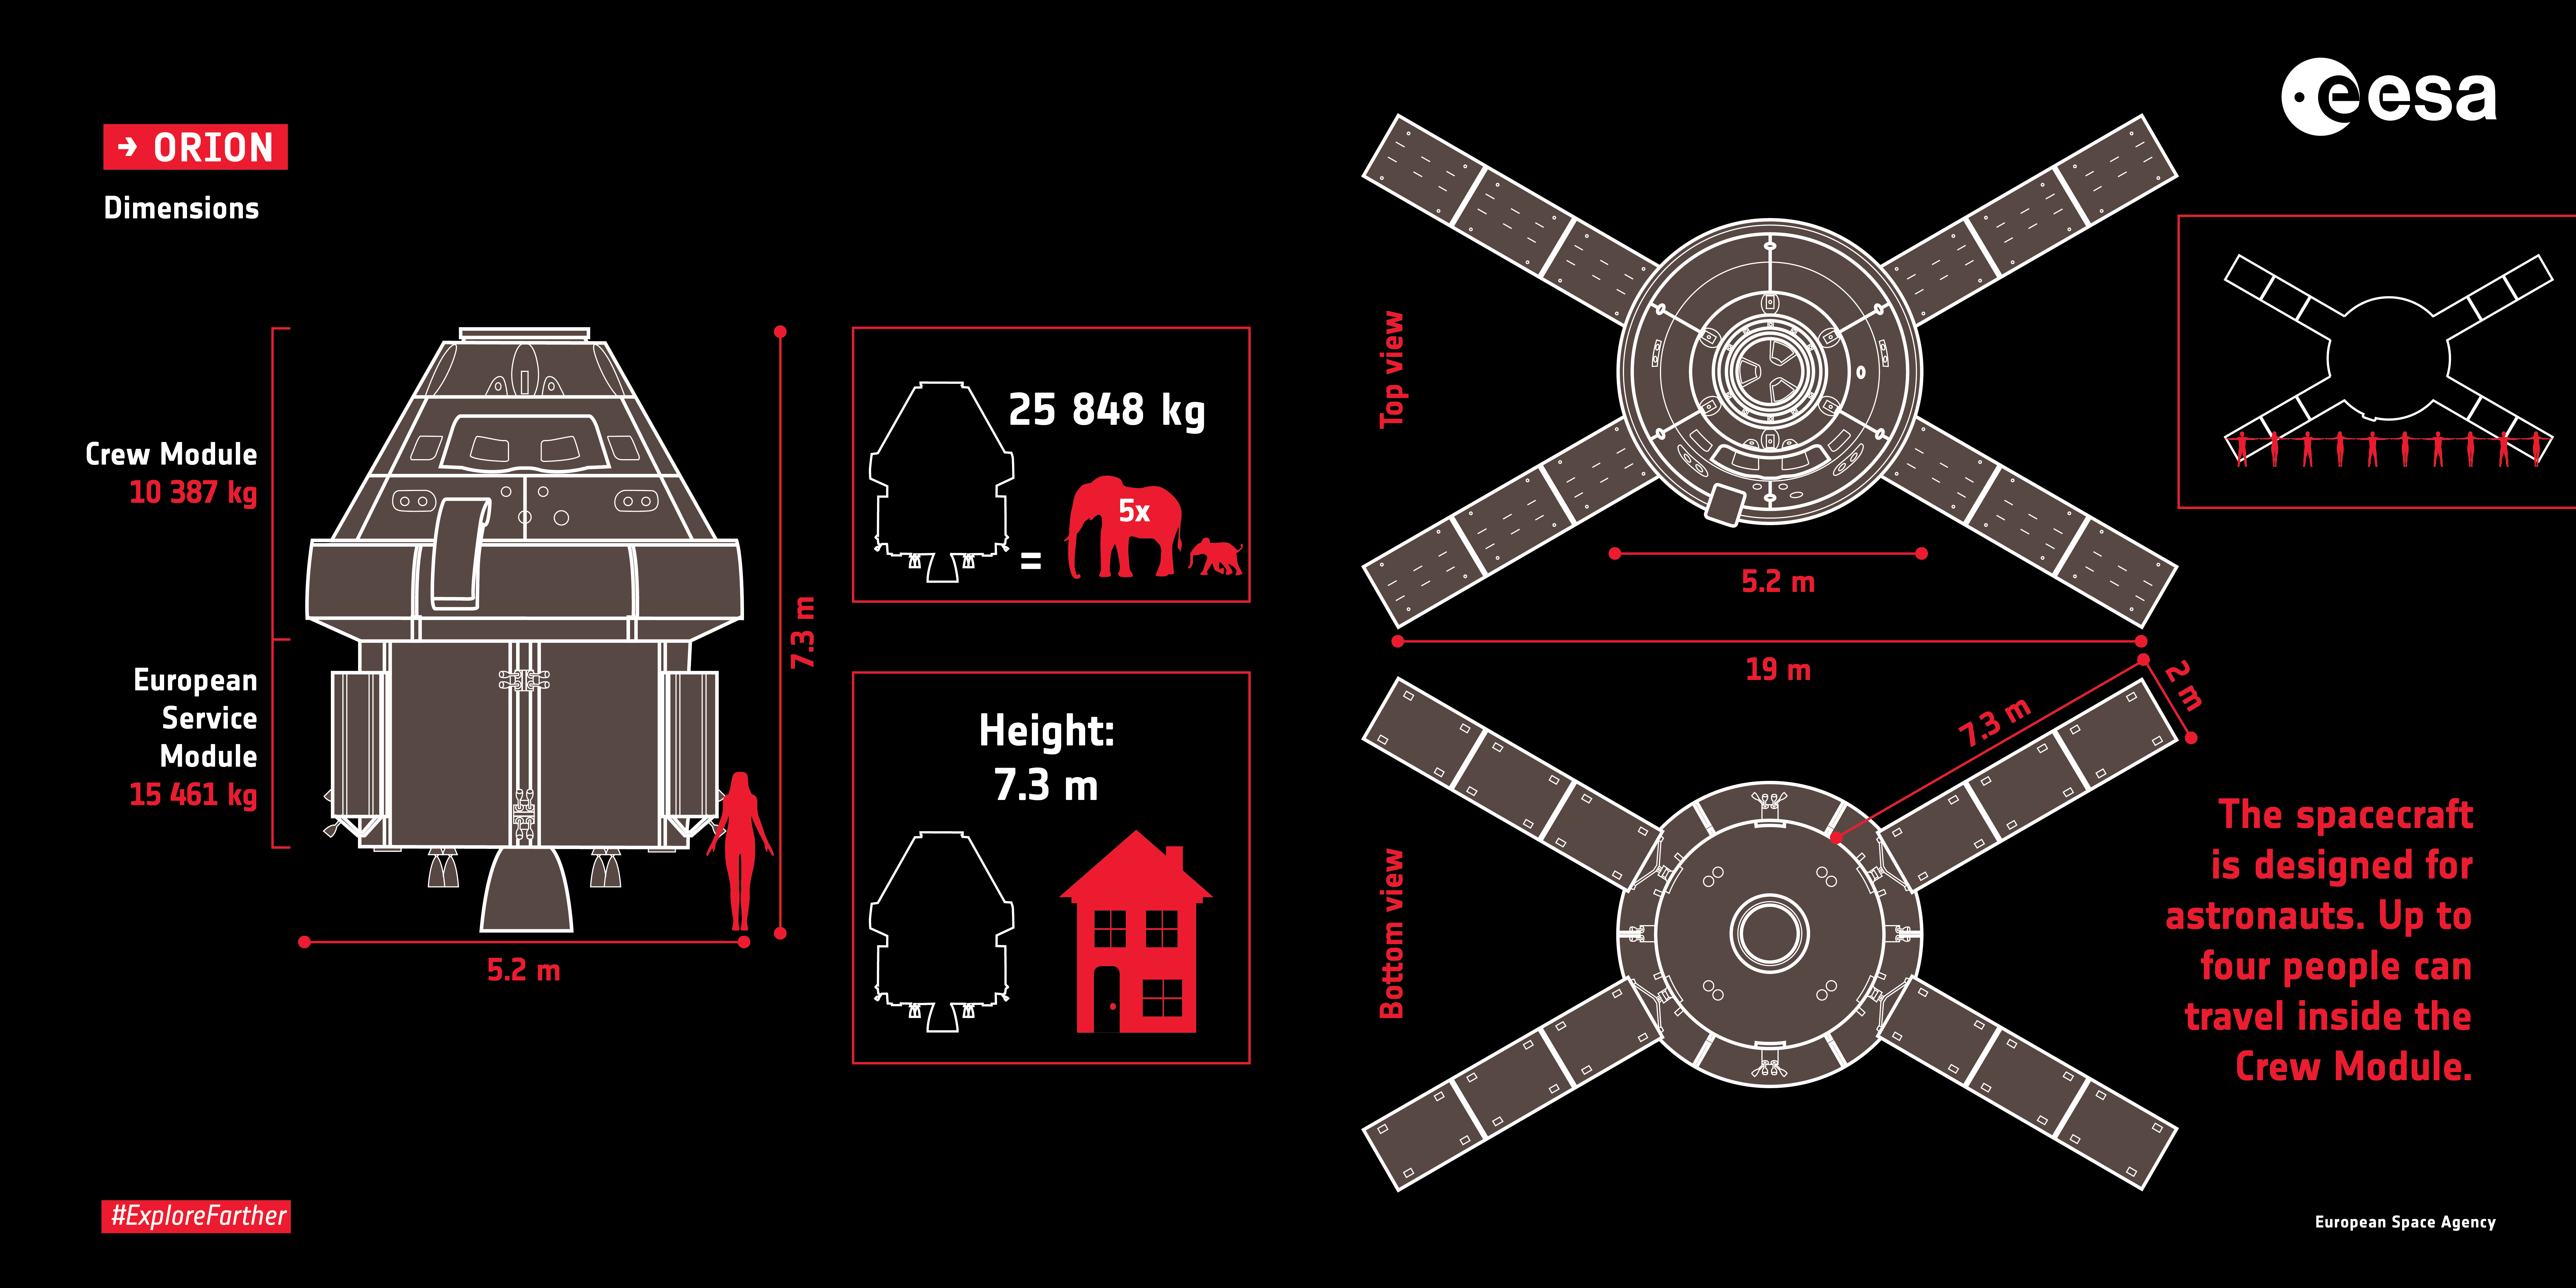 A diagram of the Orion spacecraft together with the European Service Module